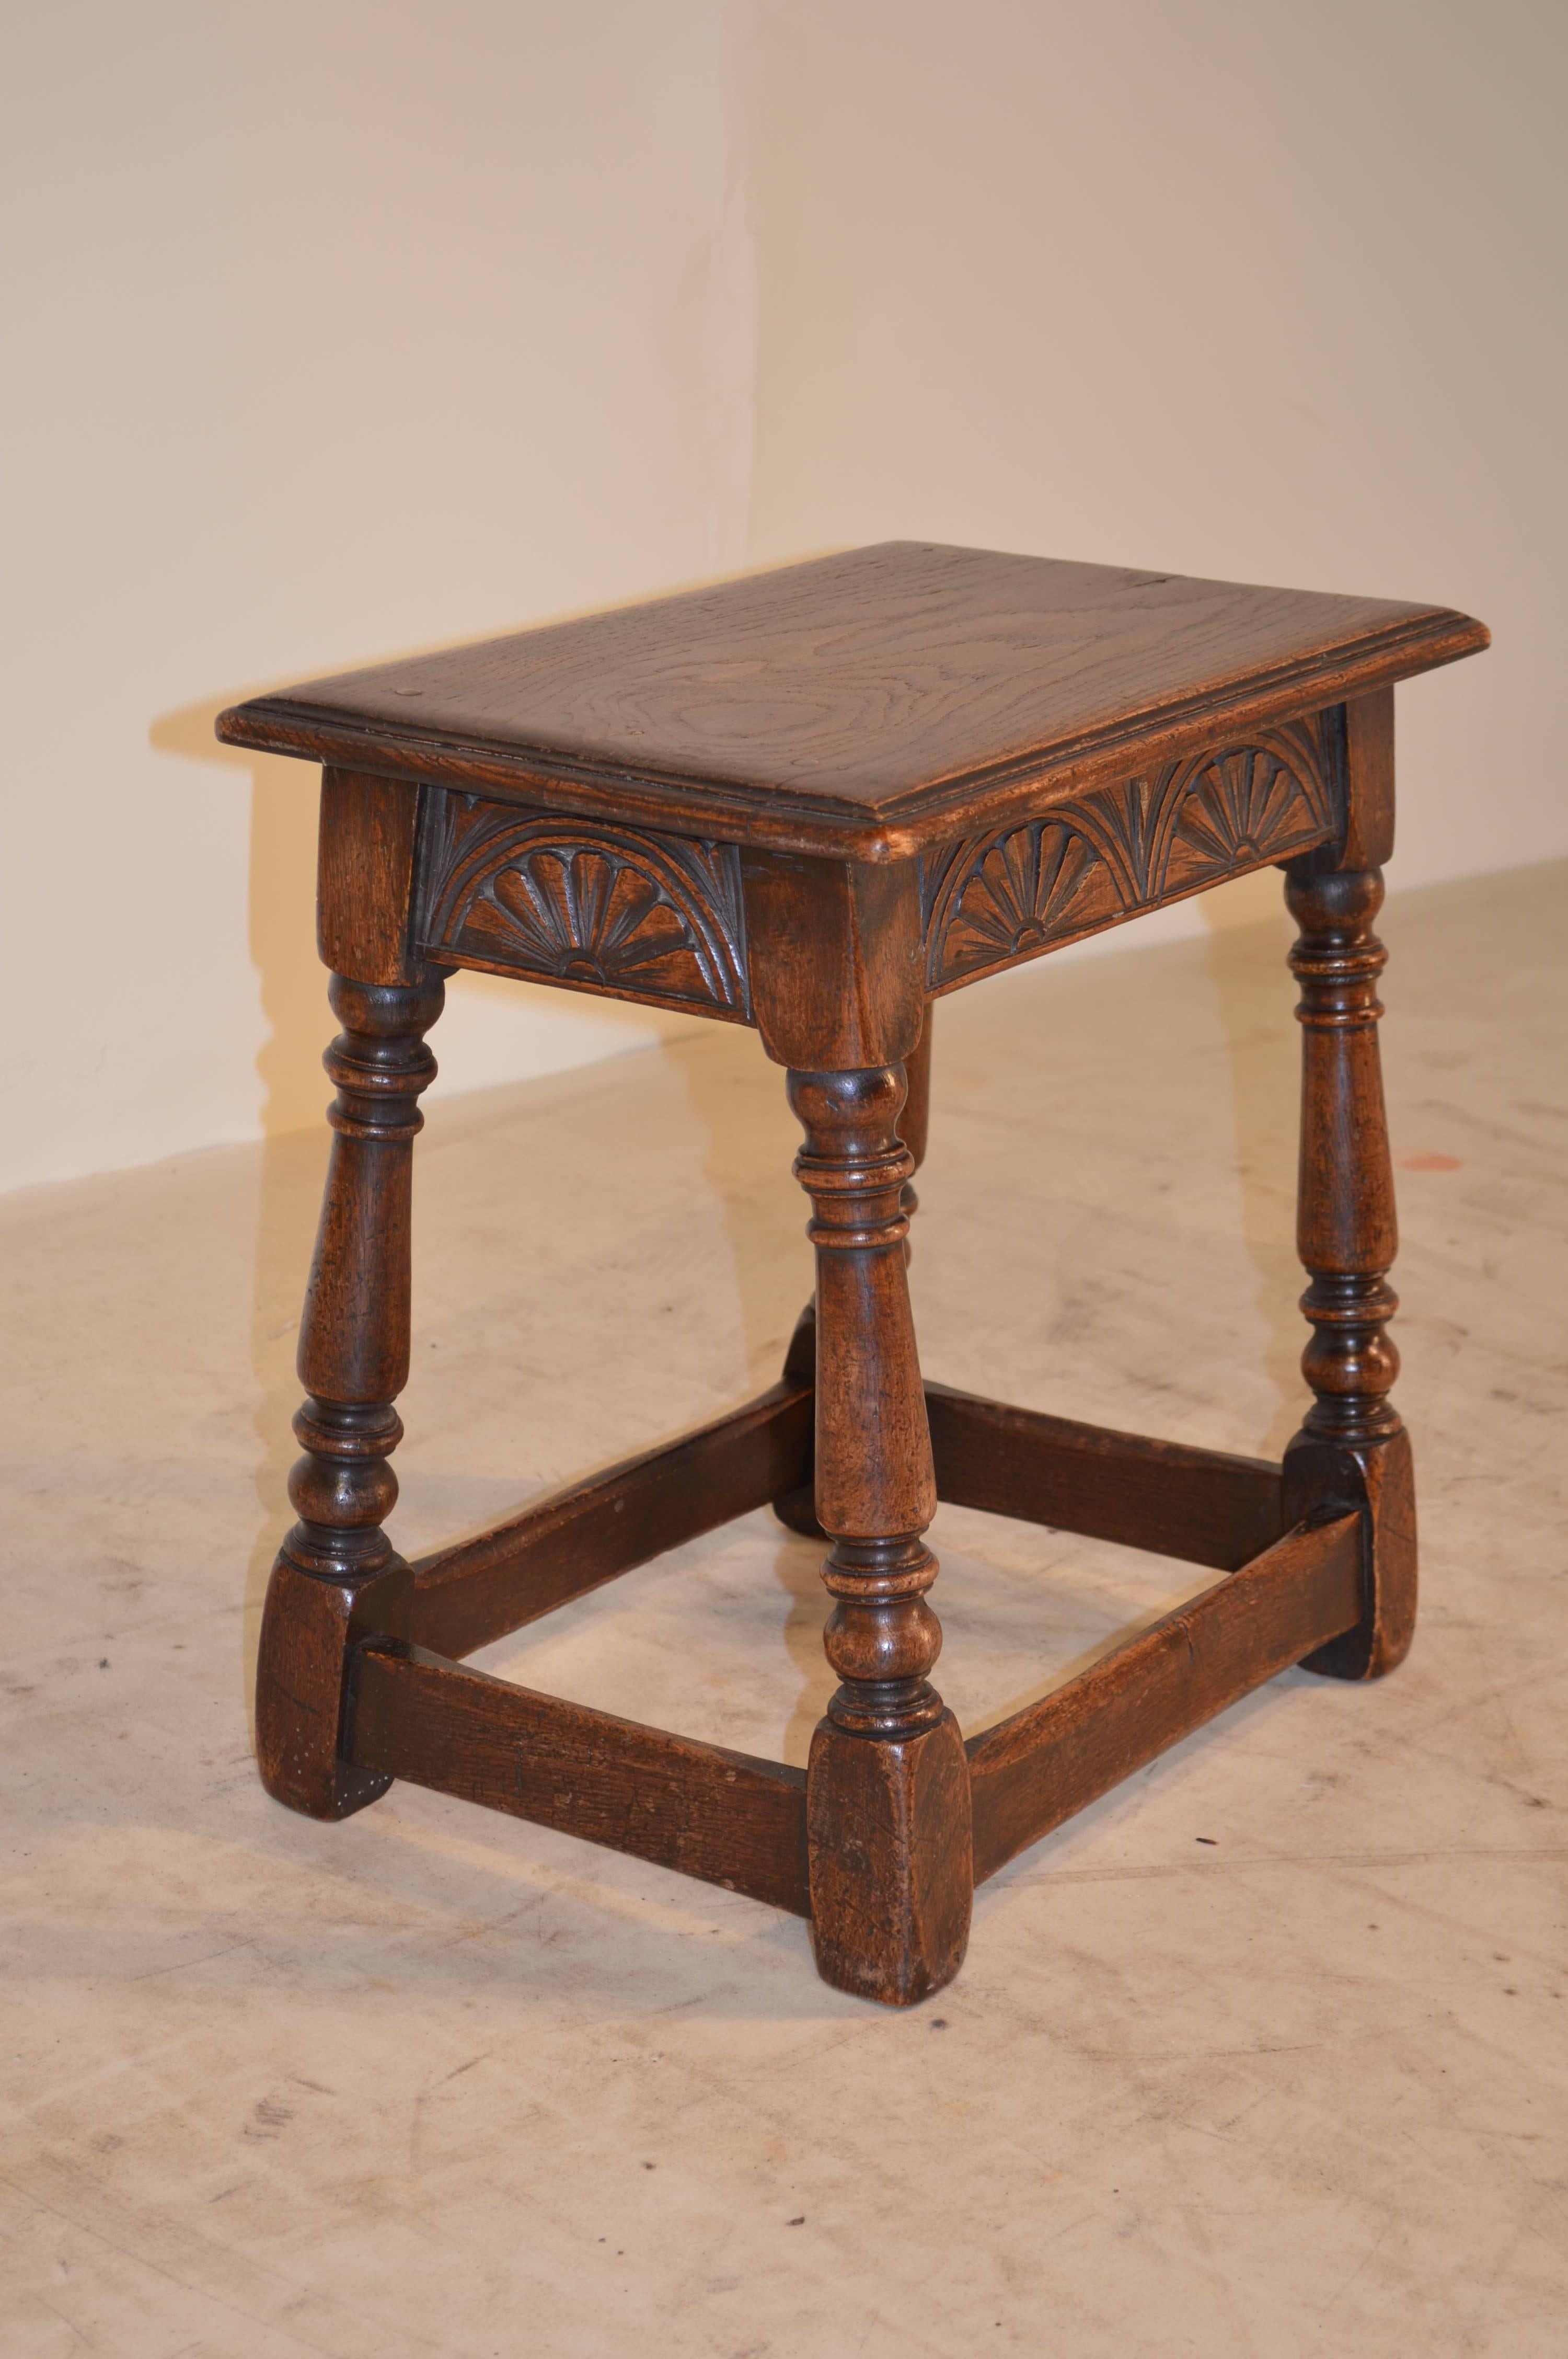 19th century English oak joint stool with carved decoration on the apron. The top is double beveled and has slight shrinkage. The legs are hand-turned and are joined by stretchers.